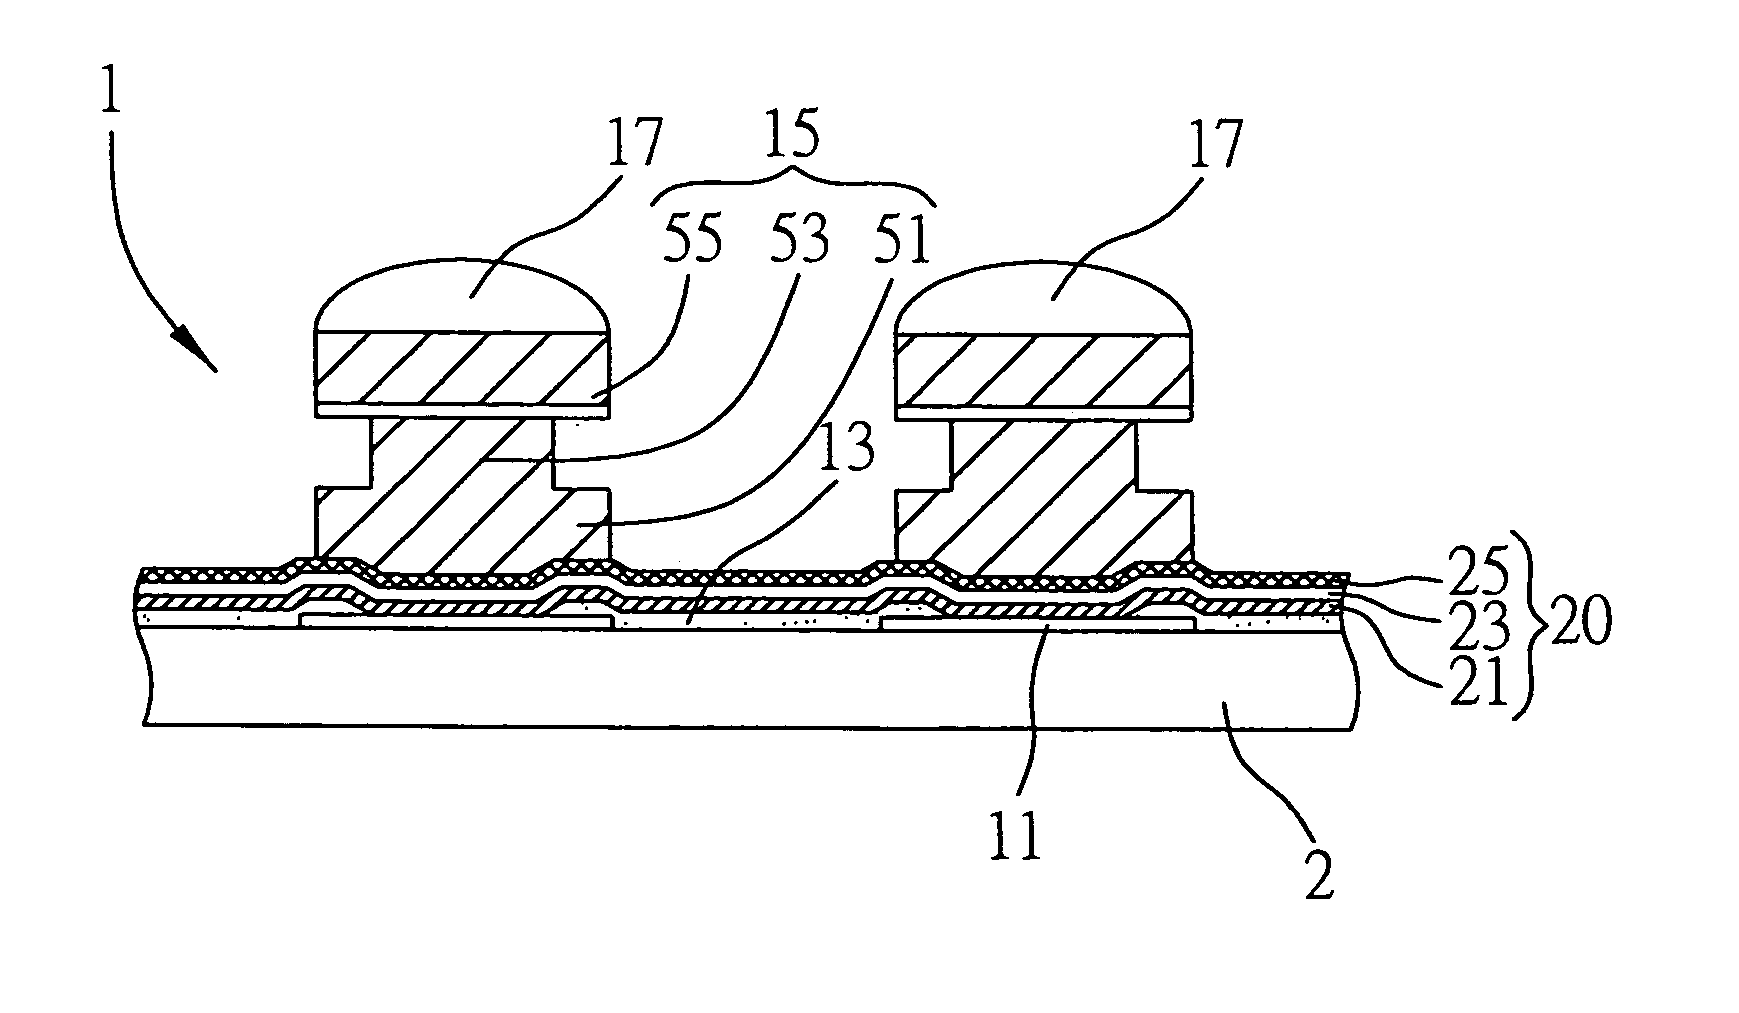 Bump structure of semiconductor package and method for fabricating the same